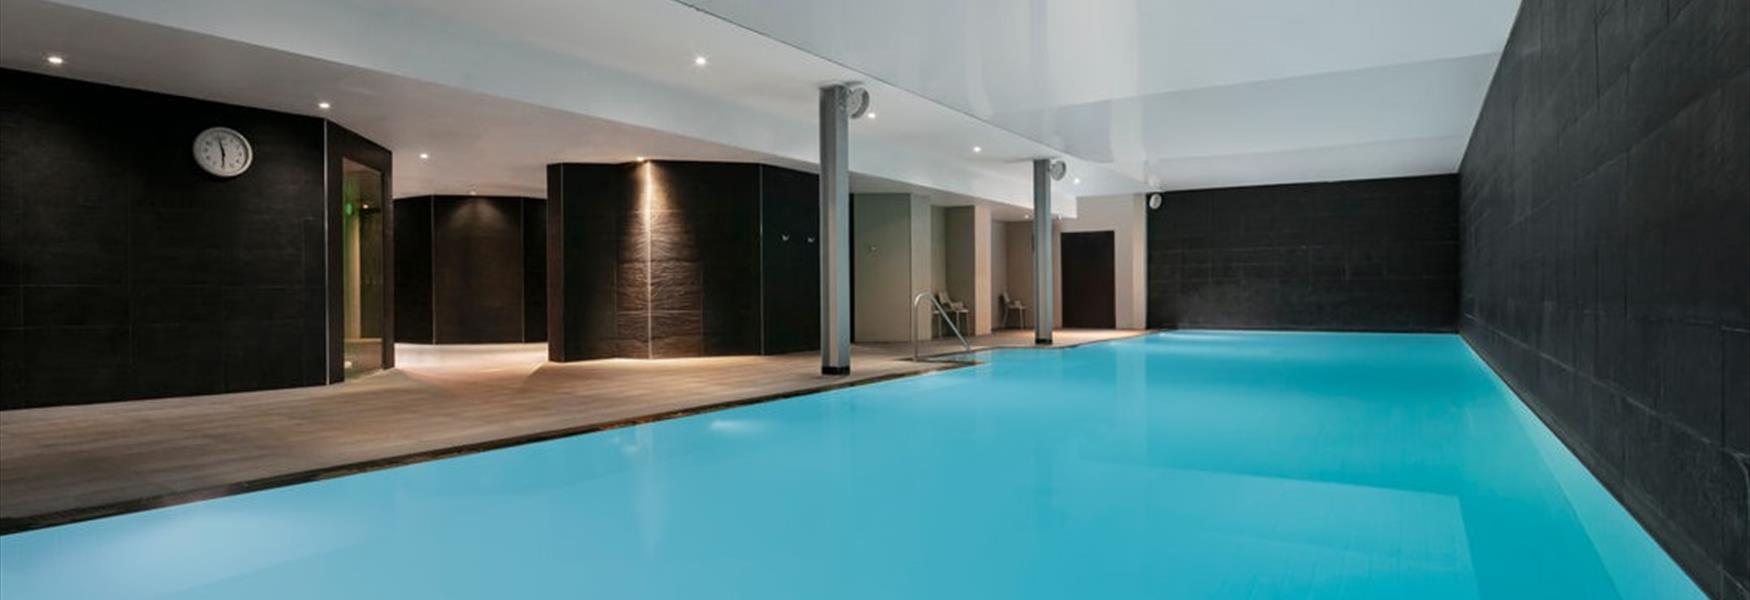 The Spa at the Doubletree by Hilton Chester